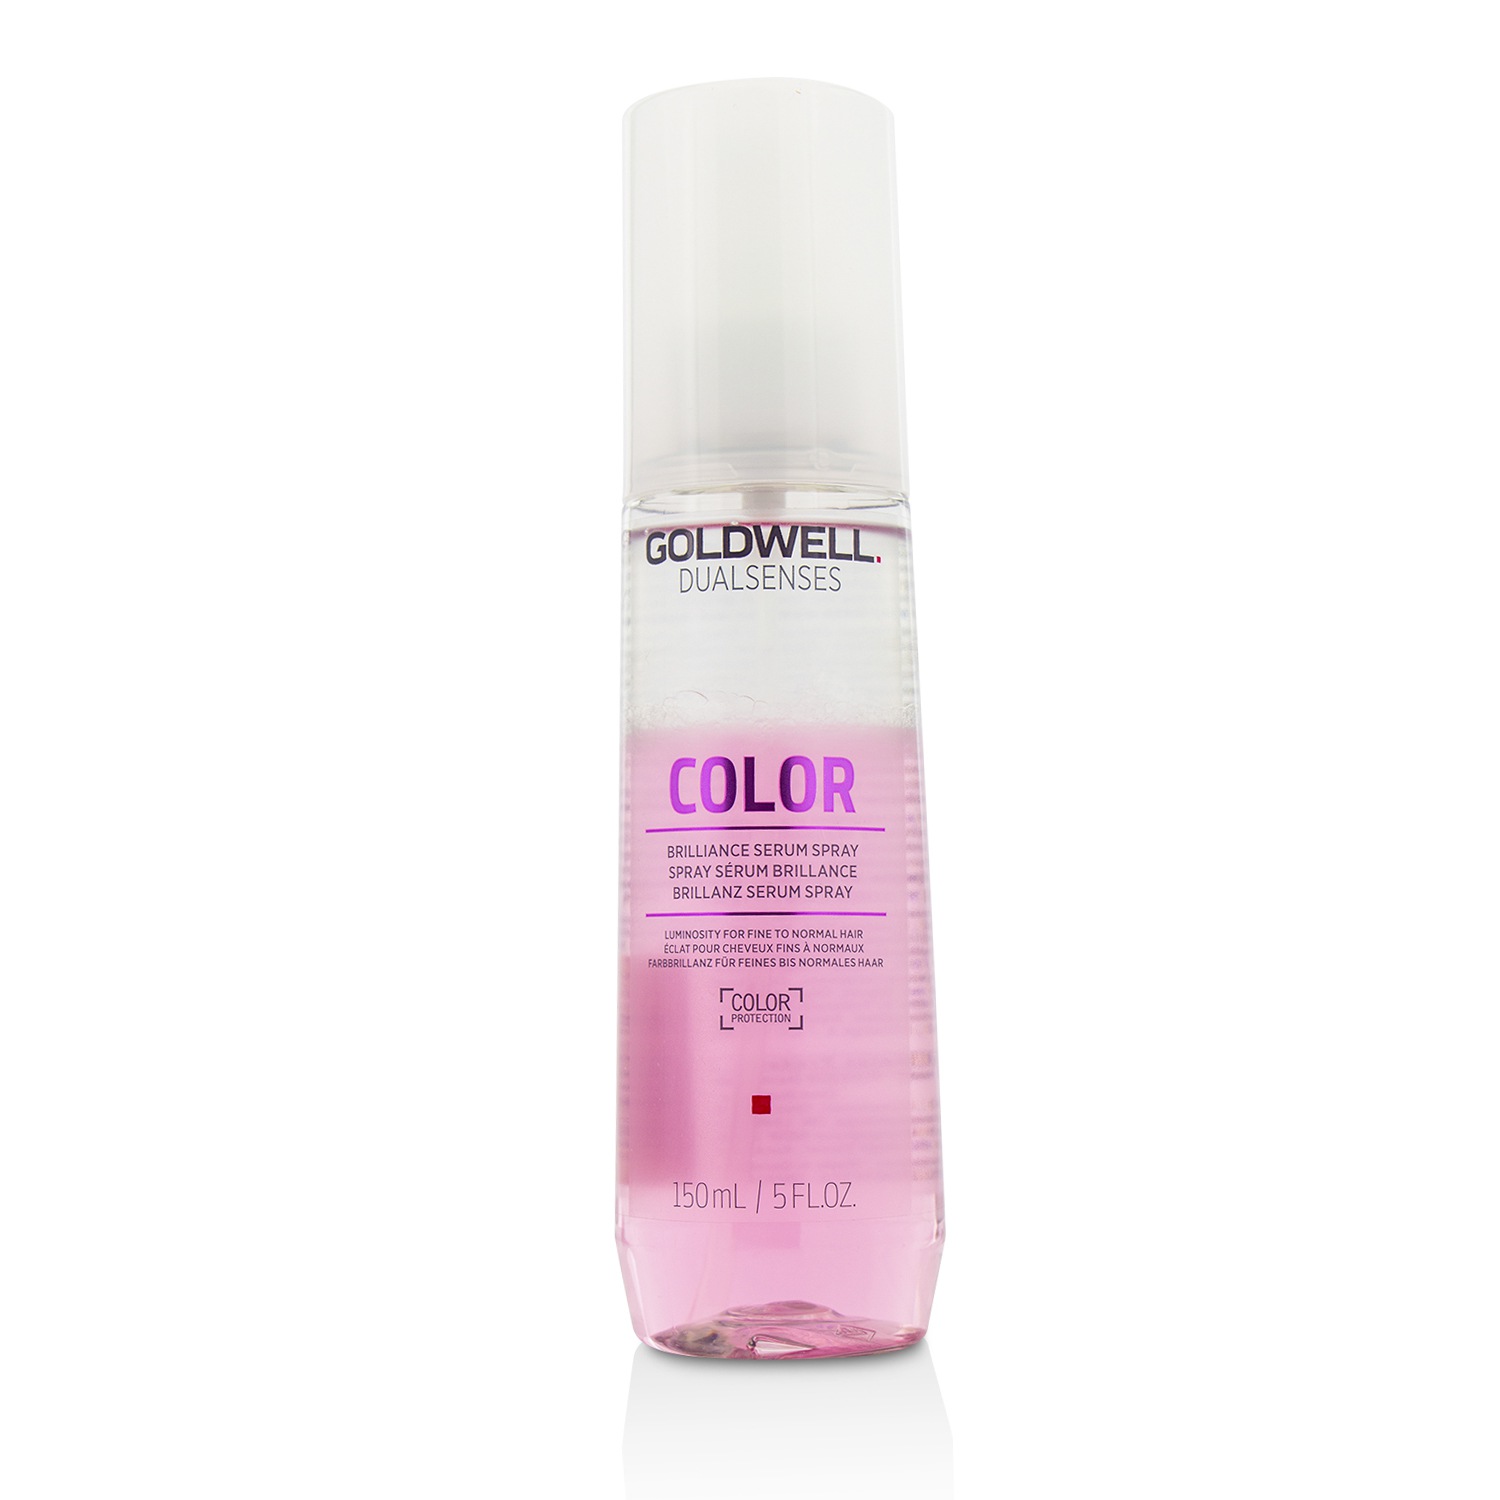 Dual Senses Color Brilliance Serum Spray (Luminosity For Fine to Normal Hair) Goldwell Image